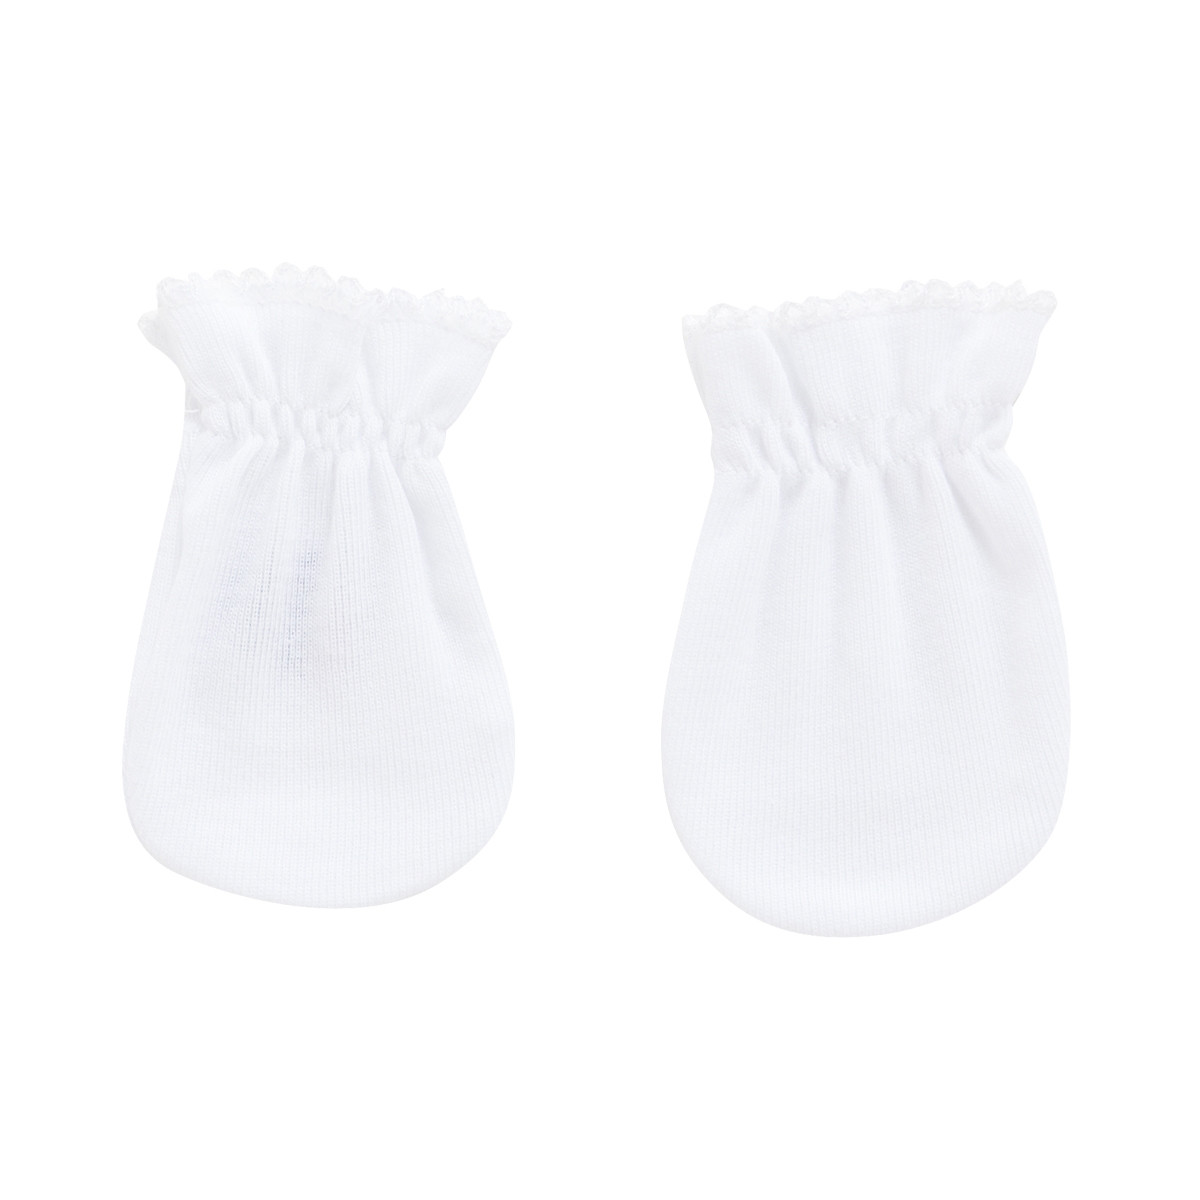 PAIR OF MITTENS LISO WHITE CAMBRASS - 1